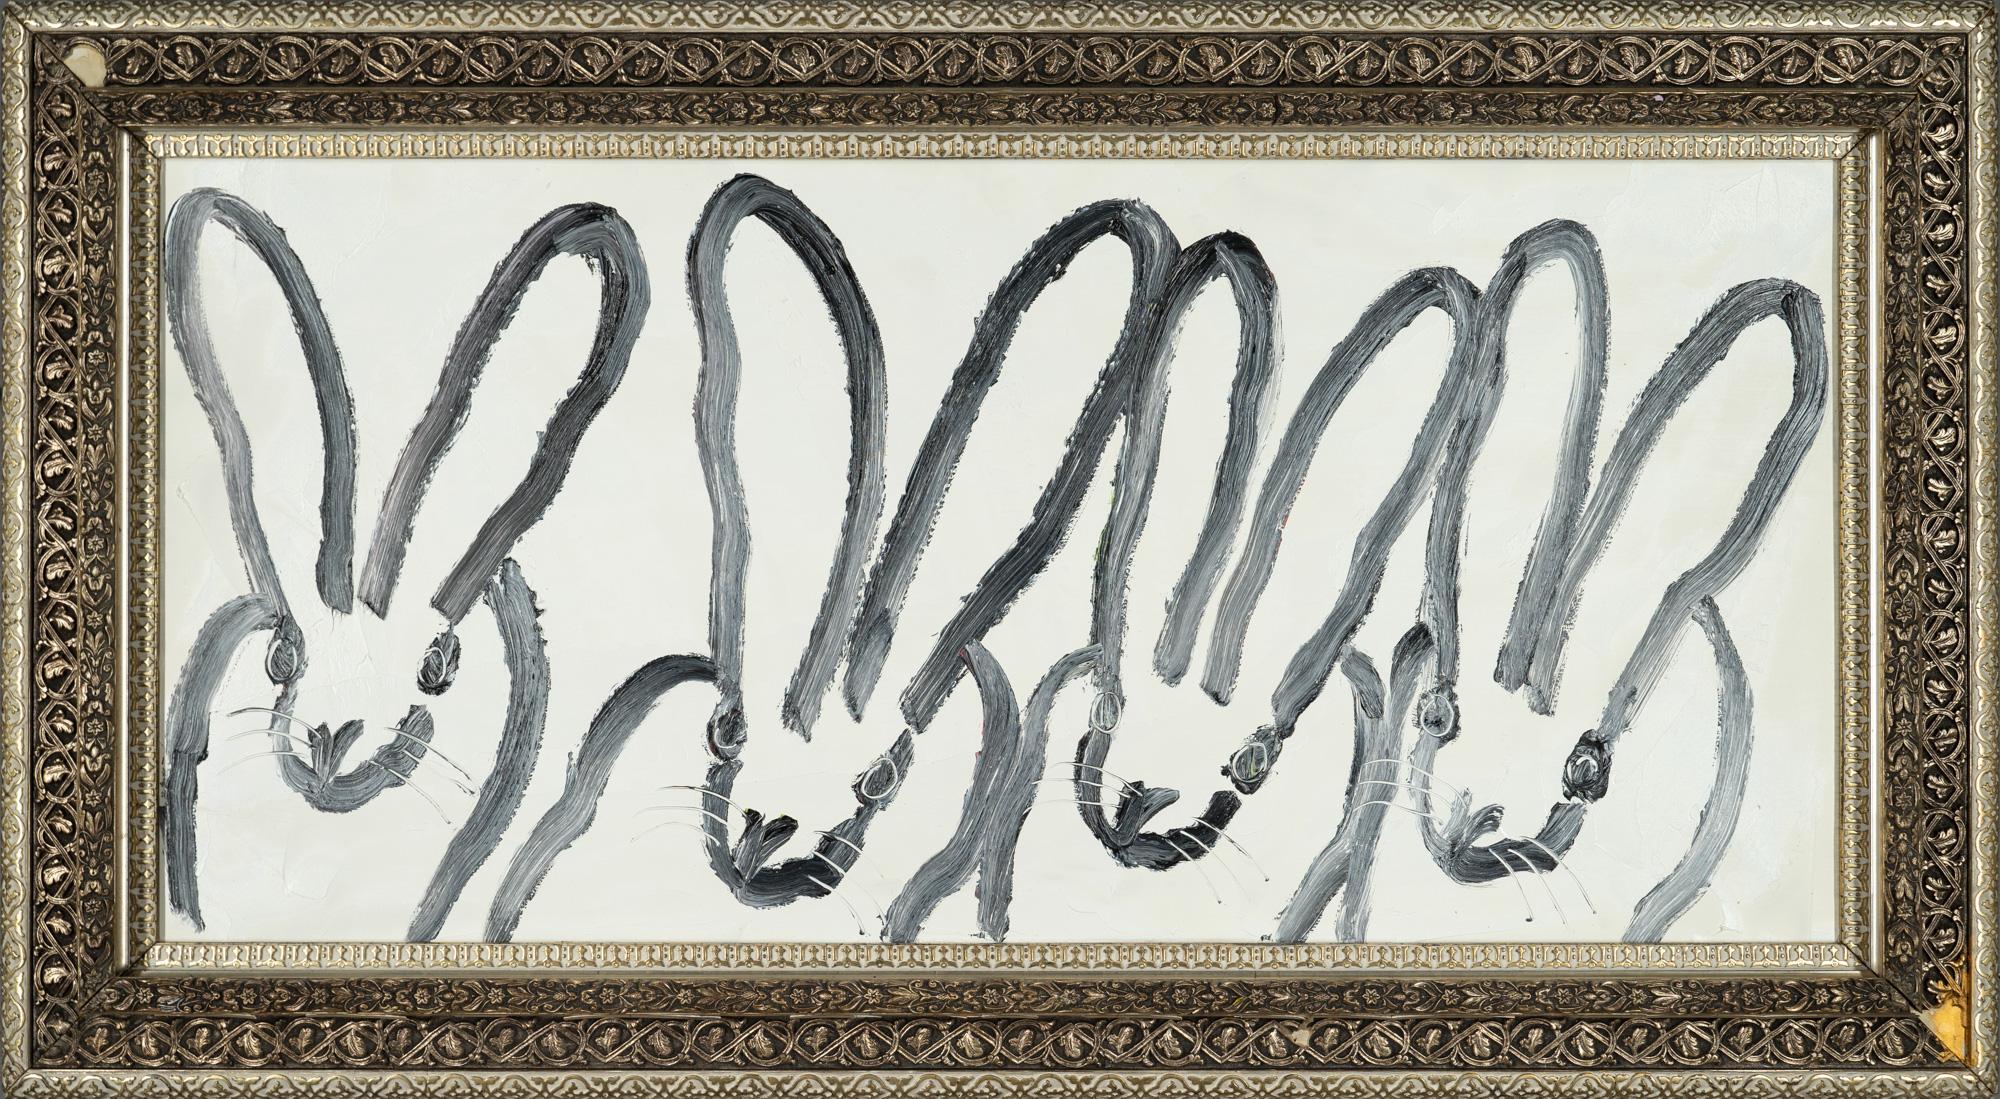 "4 Play 14" is a framed oil painting on wood by Hunt Slonem, depicting 4 rabbits in painterly contour lines set against a simple white background. 

This piece is finished in an antique frame, which has been hand-selected by the artist for this